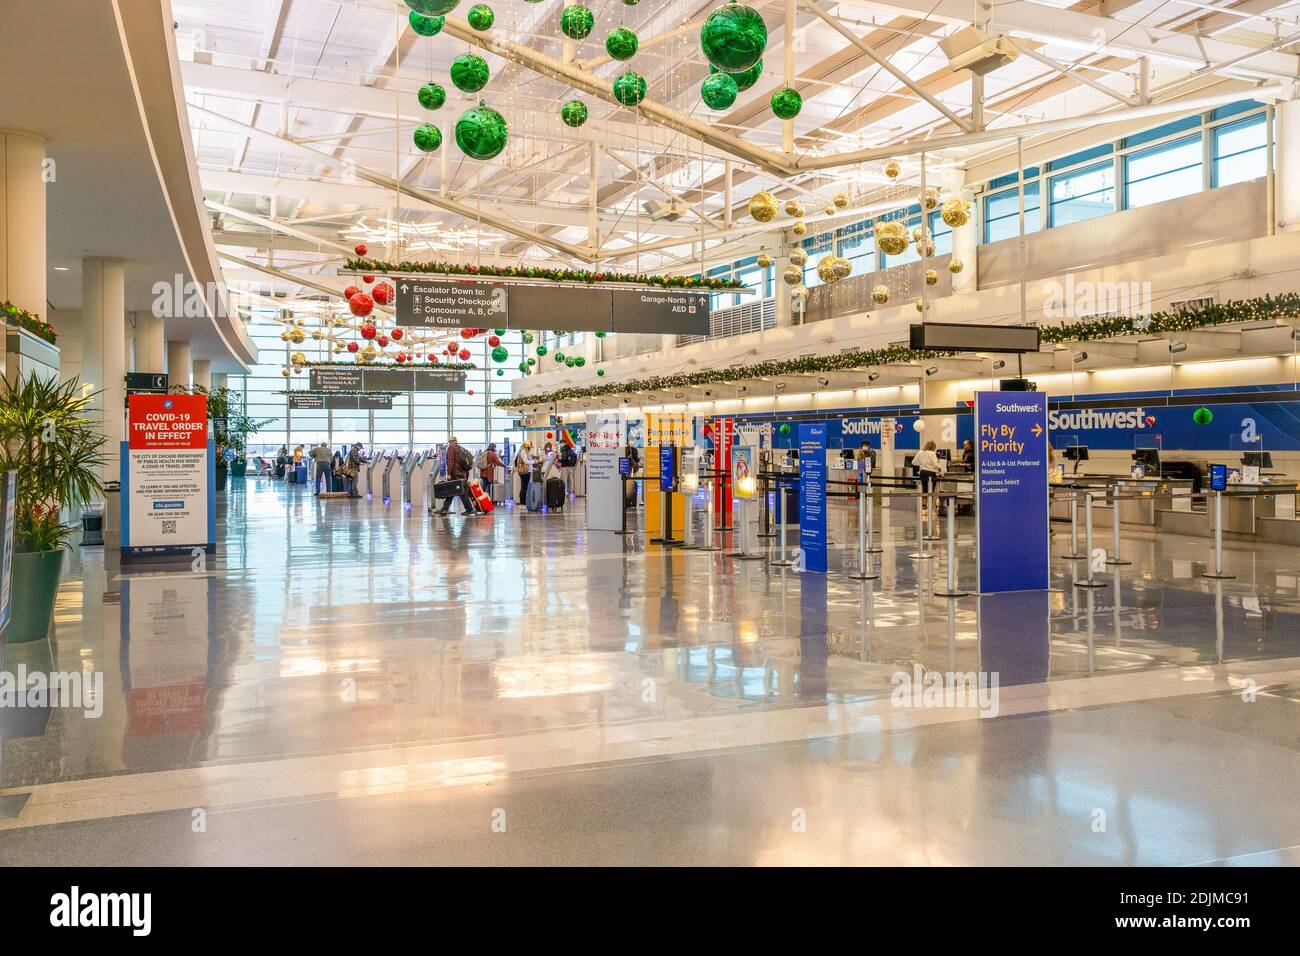 The Southwest check in at Midway International Airport where people can check their bags at kiosks before going to security during the pandemic. Stock Photo